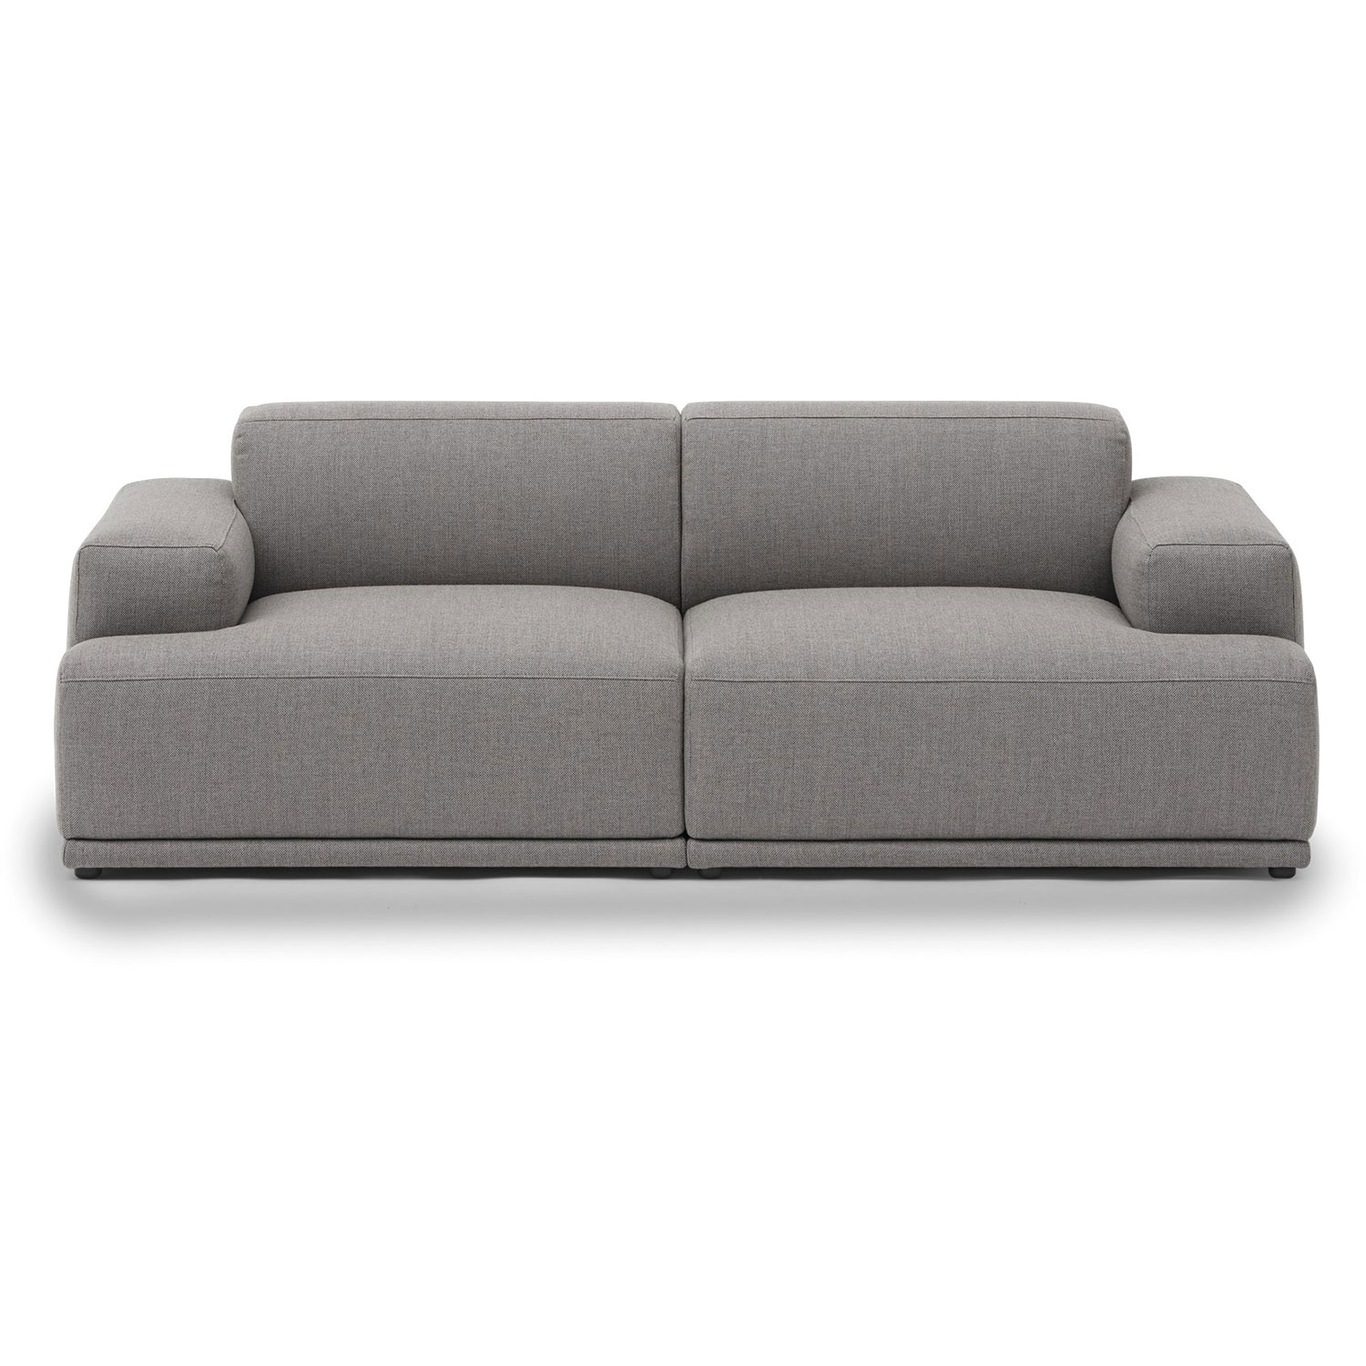 Connect Soft Soffa 2-Sits Config 1, Re-Wool 128